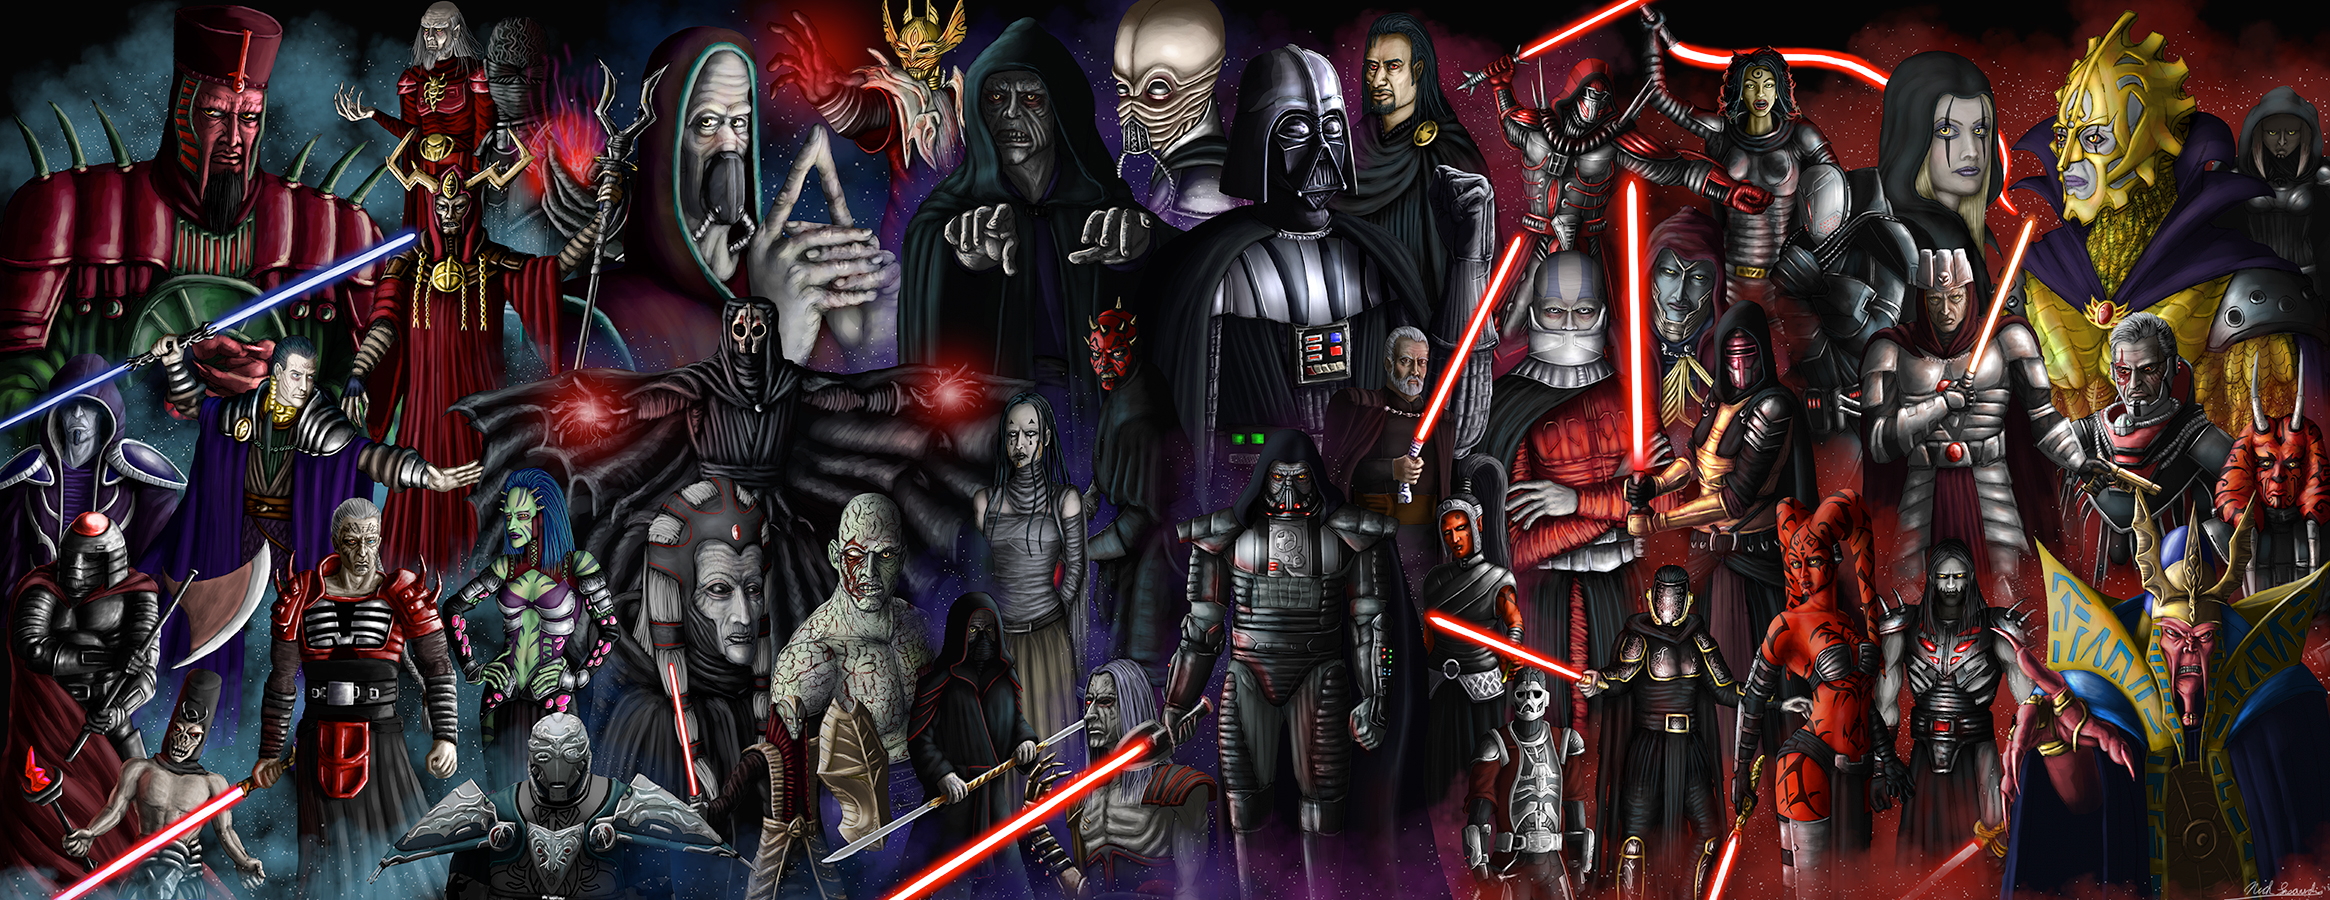 Sith Lord Wallpaper The sith lords by mr 2330x900